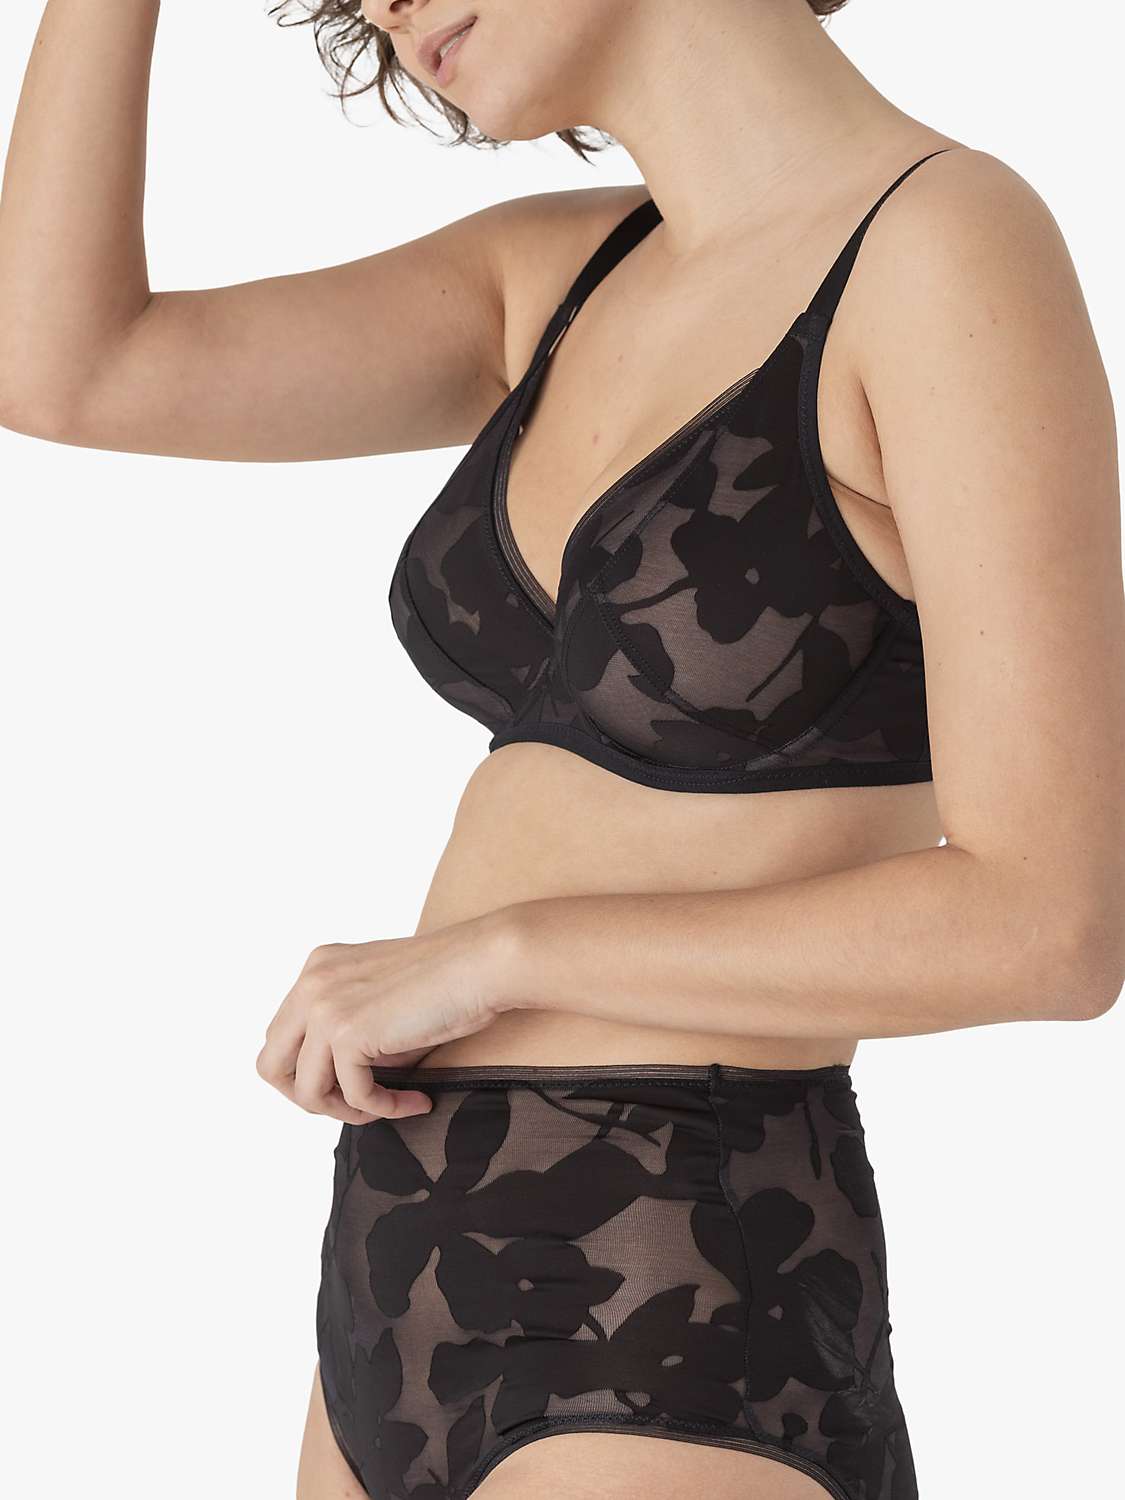 Buy Maison Lejaby Ombrage Full Cup Underwired Bra Online at johnlewis.com